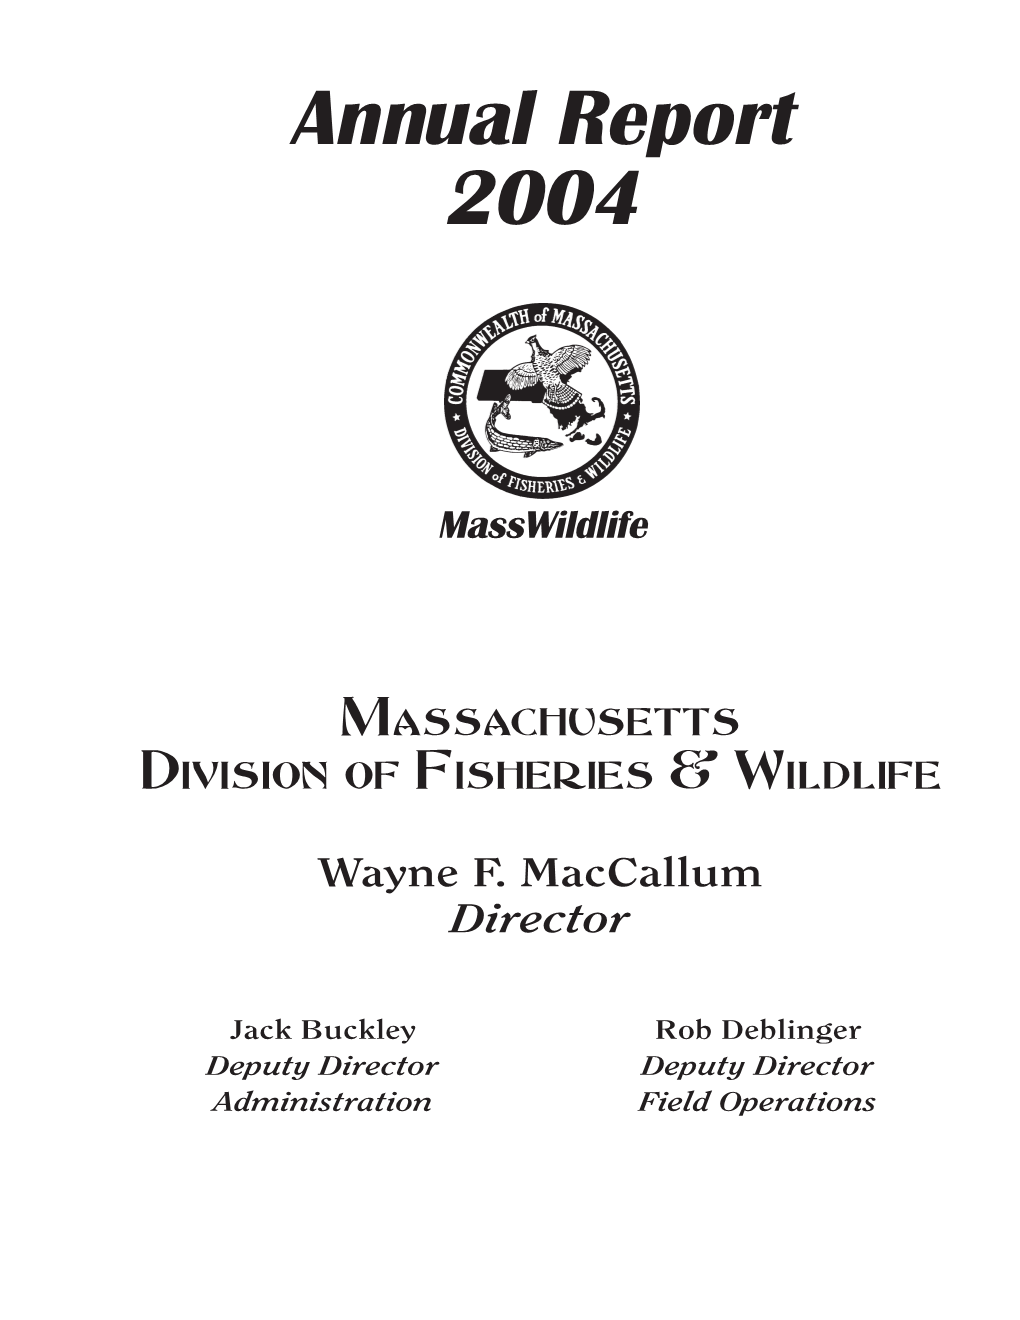 FY2004 Annual Report